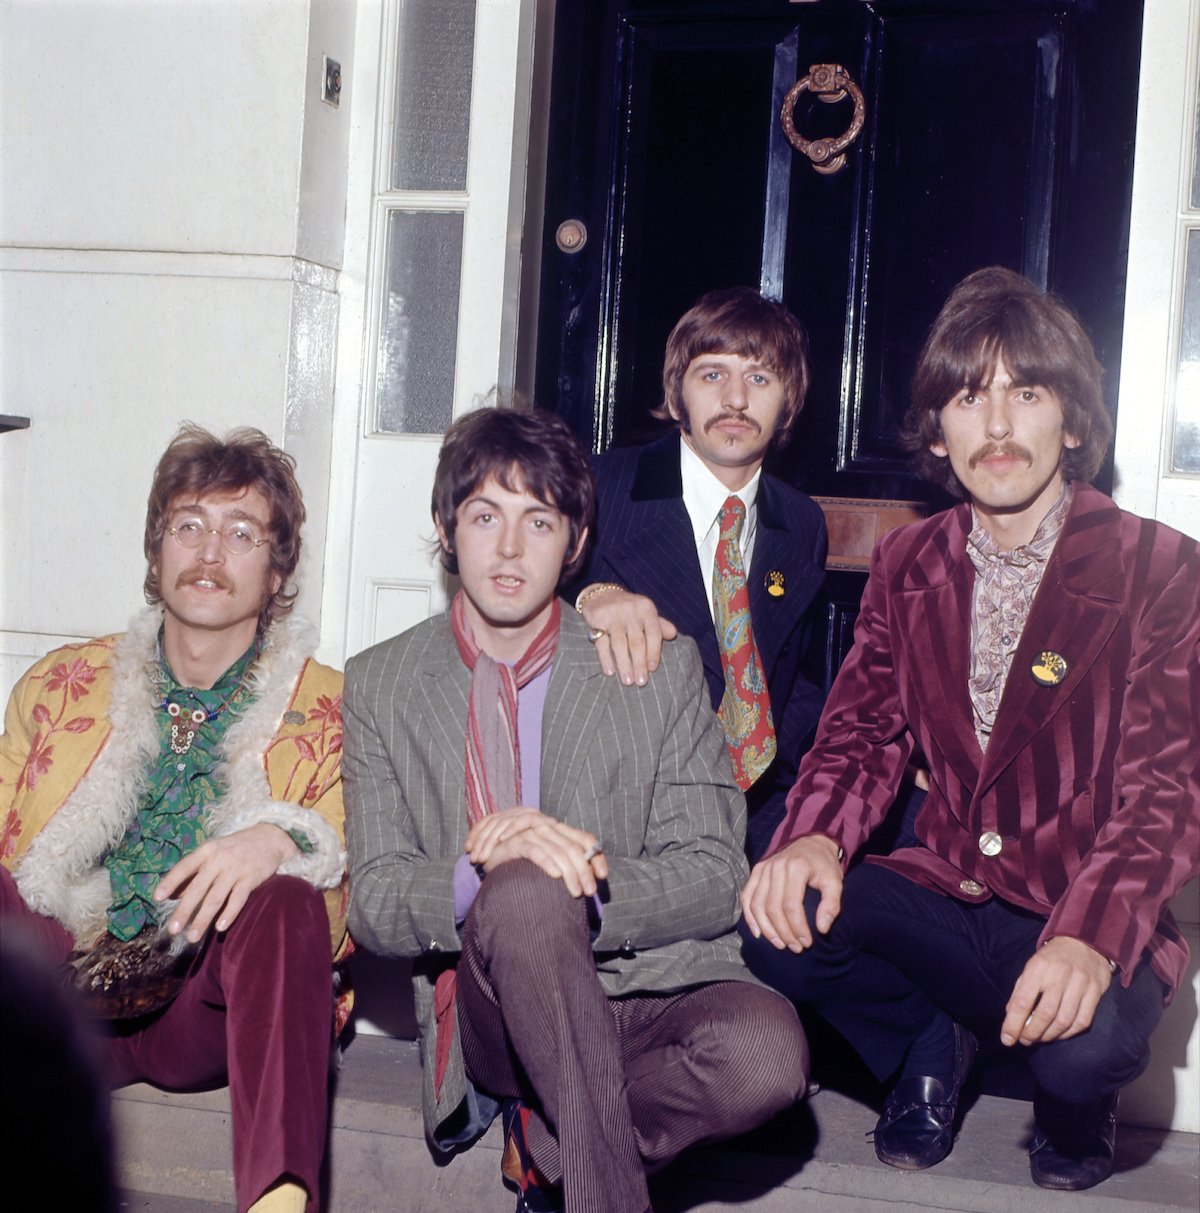 The Beatles Ringo Starr, John Lennon, Paul McCartney and George Harrison sit on a stoop in front of a door